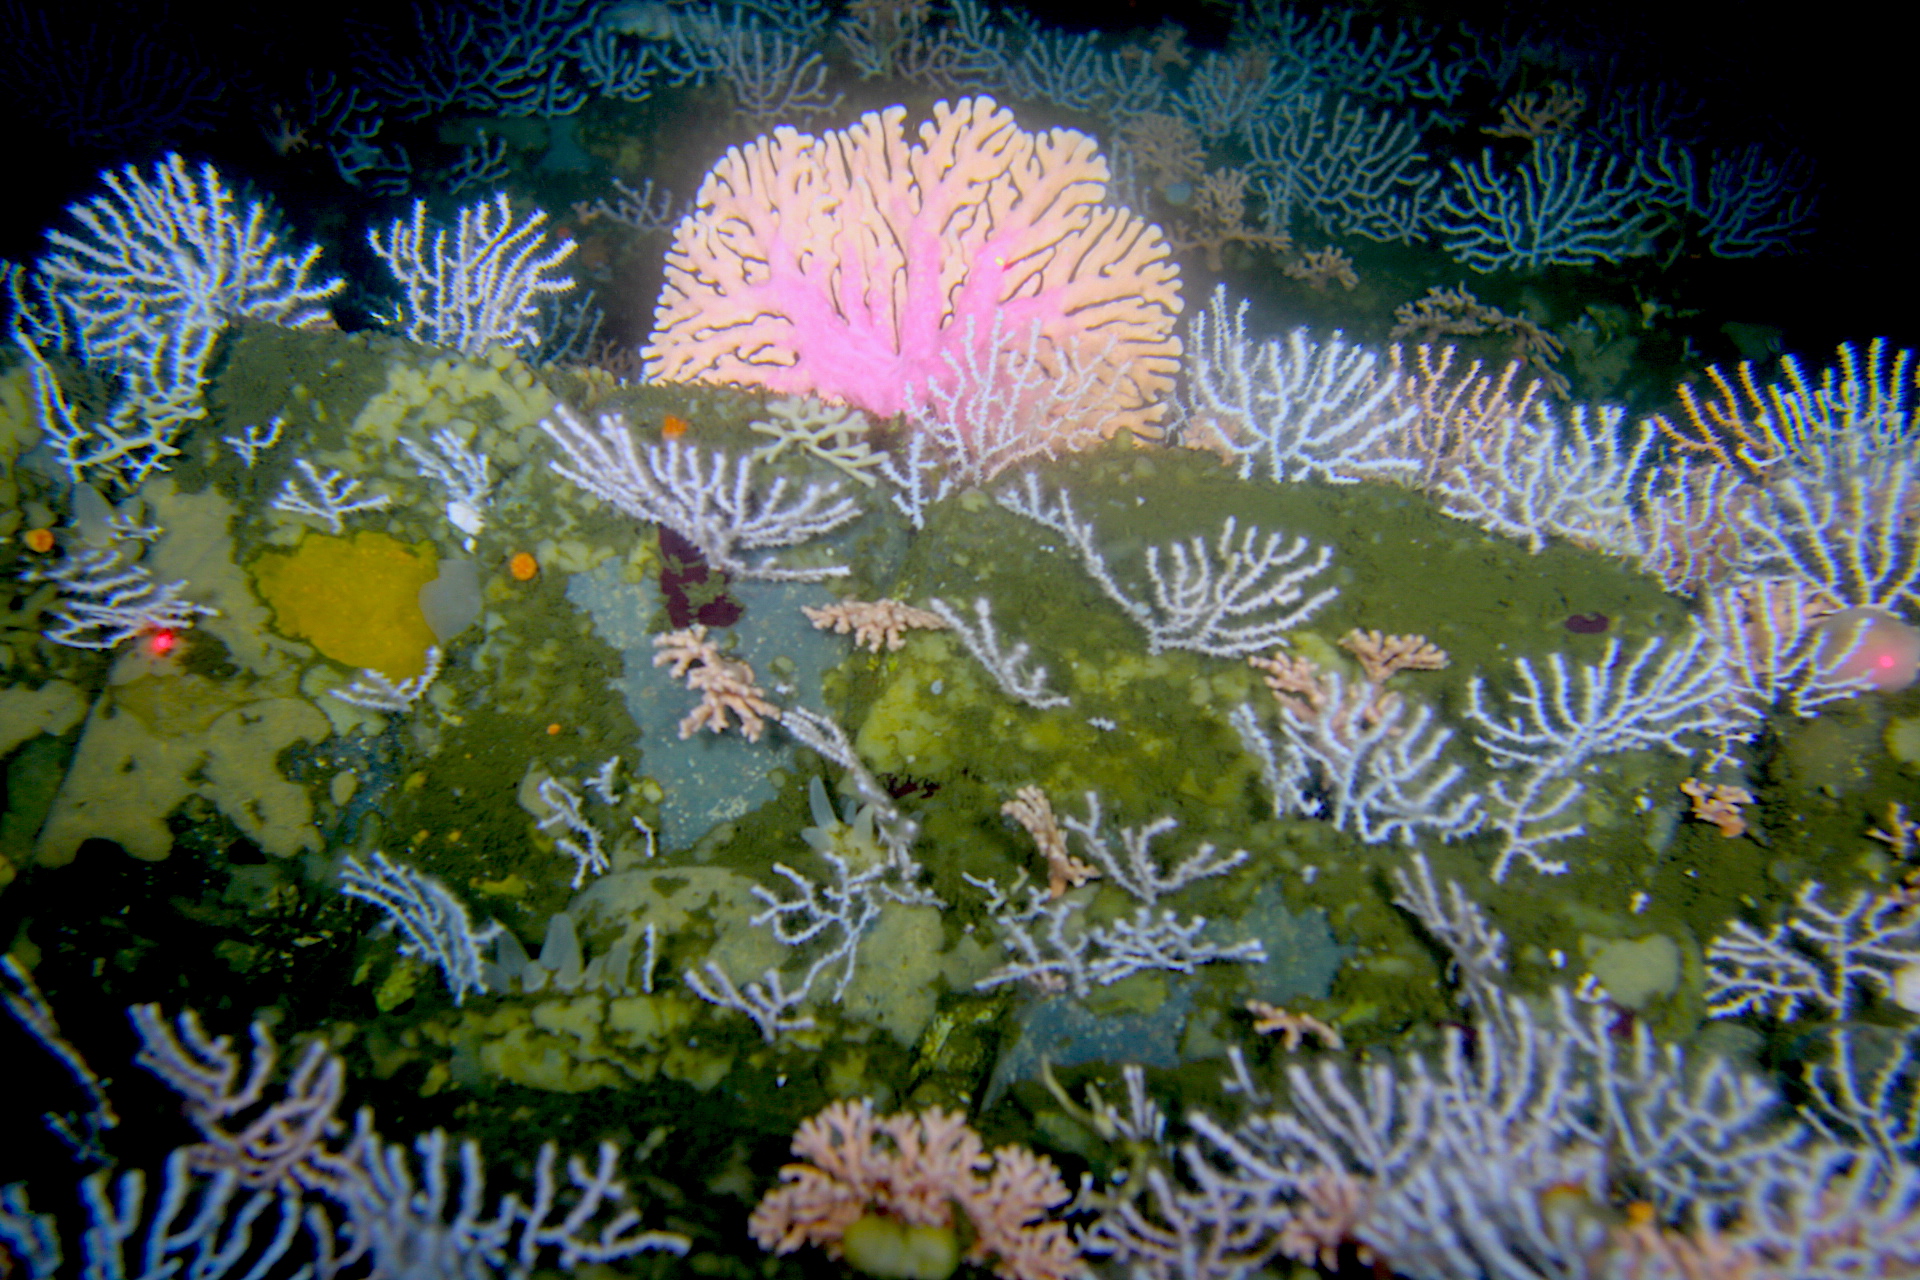 Figure 3. A pink Stylasterene and white Gorgonians inhabit inshore rocky habitats, 85m